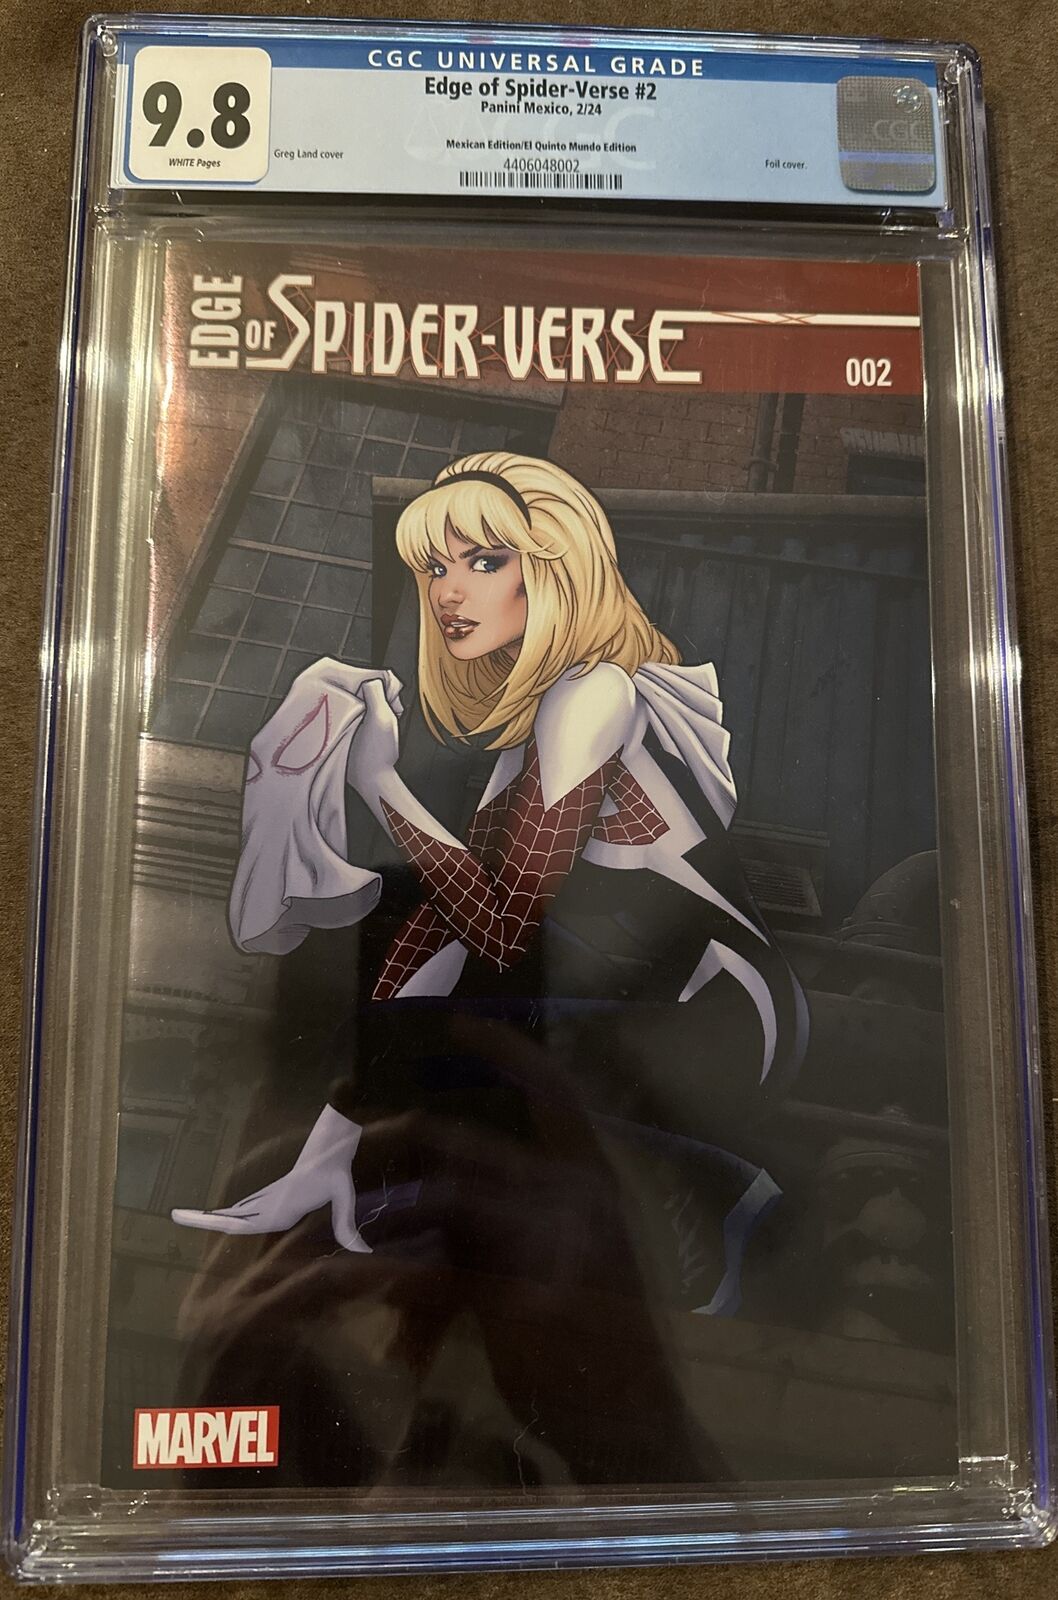 Edge Of Spider-verse #2-Mexican Edition FOIL Reprint Of Greg Land Cover- CGC 9.8